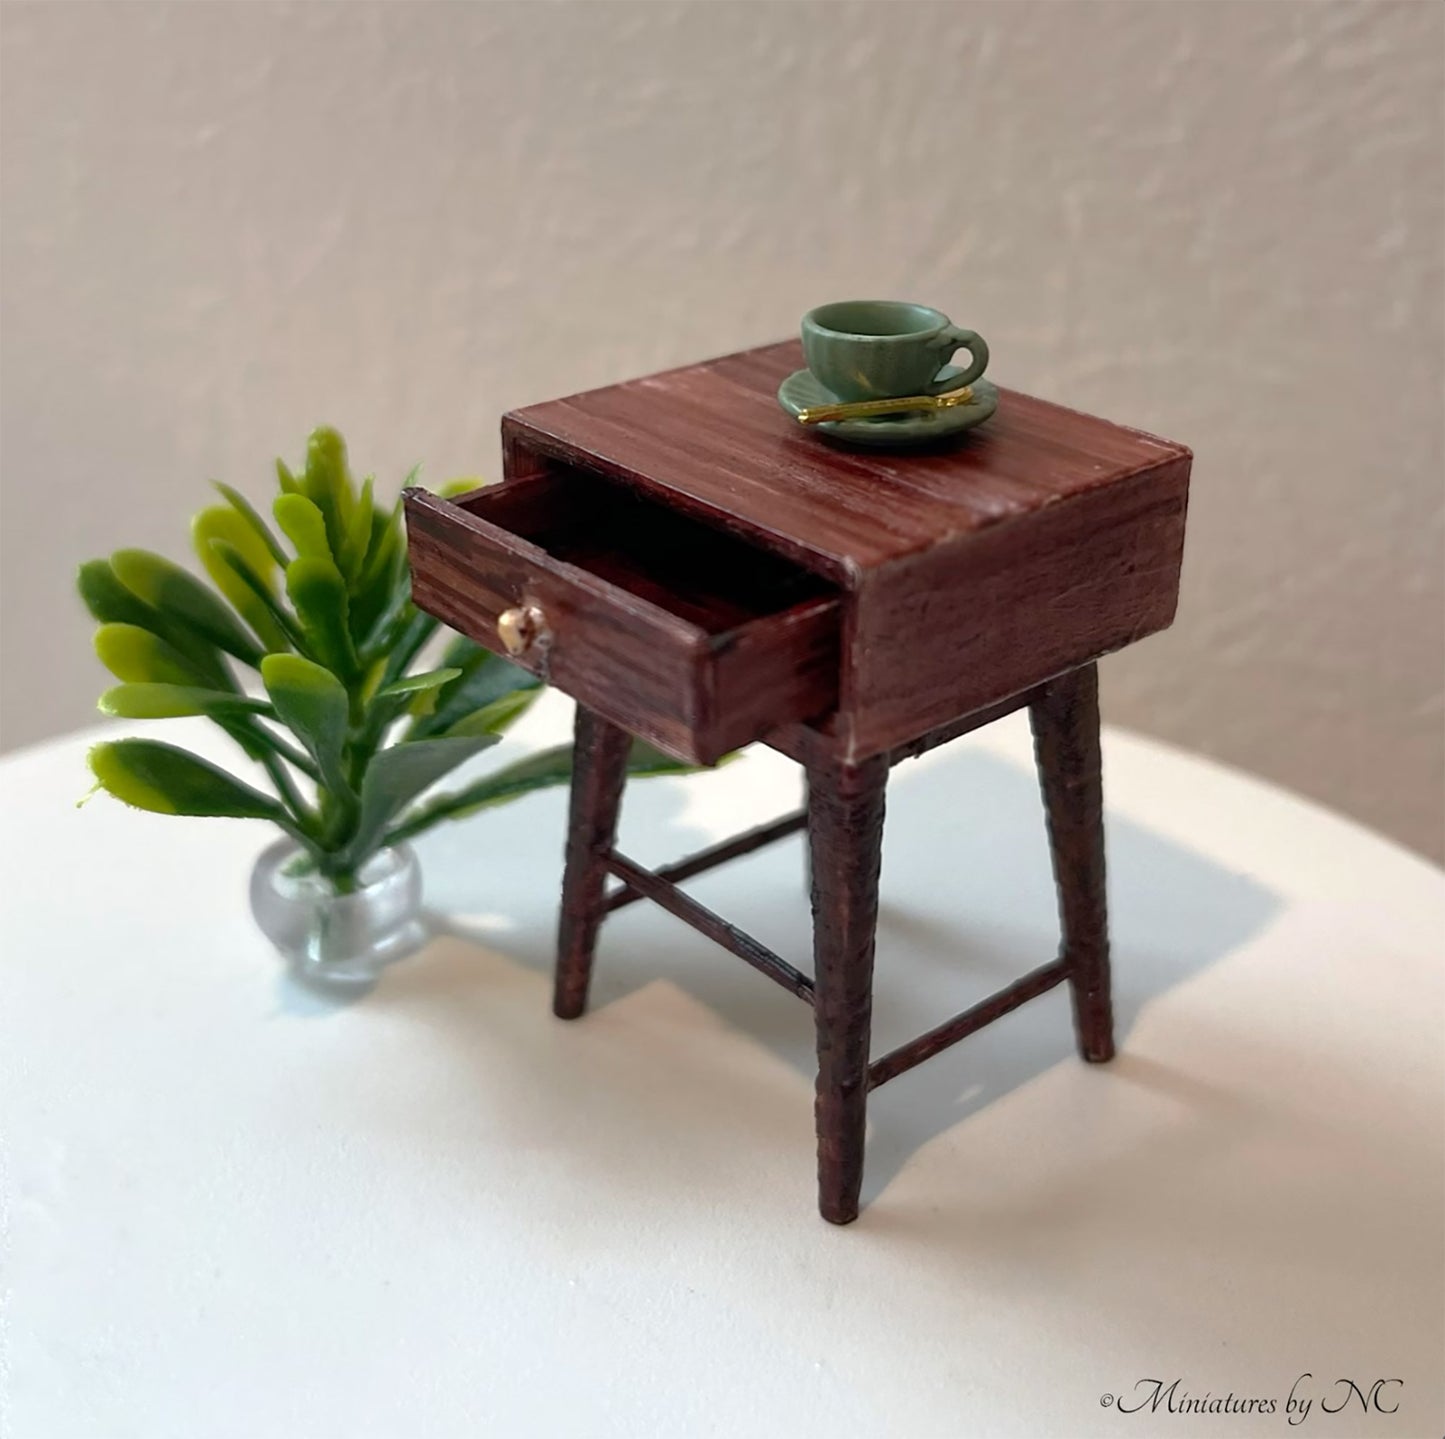 1:24 Scale Miniature Mid-Century End Table Replica | Enhance Your Miniature World